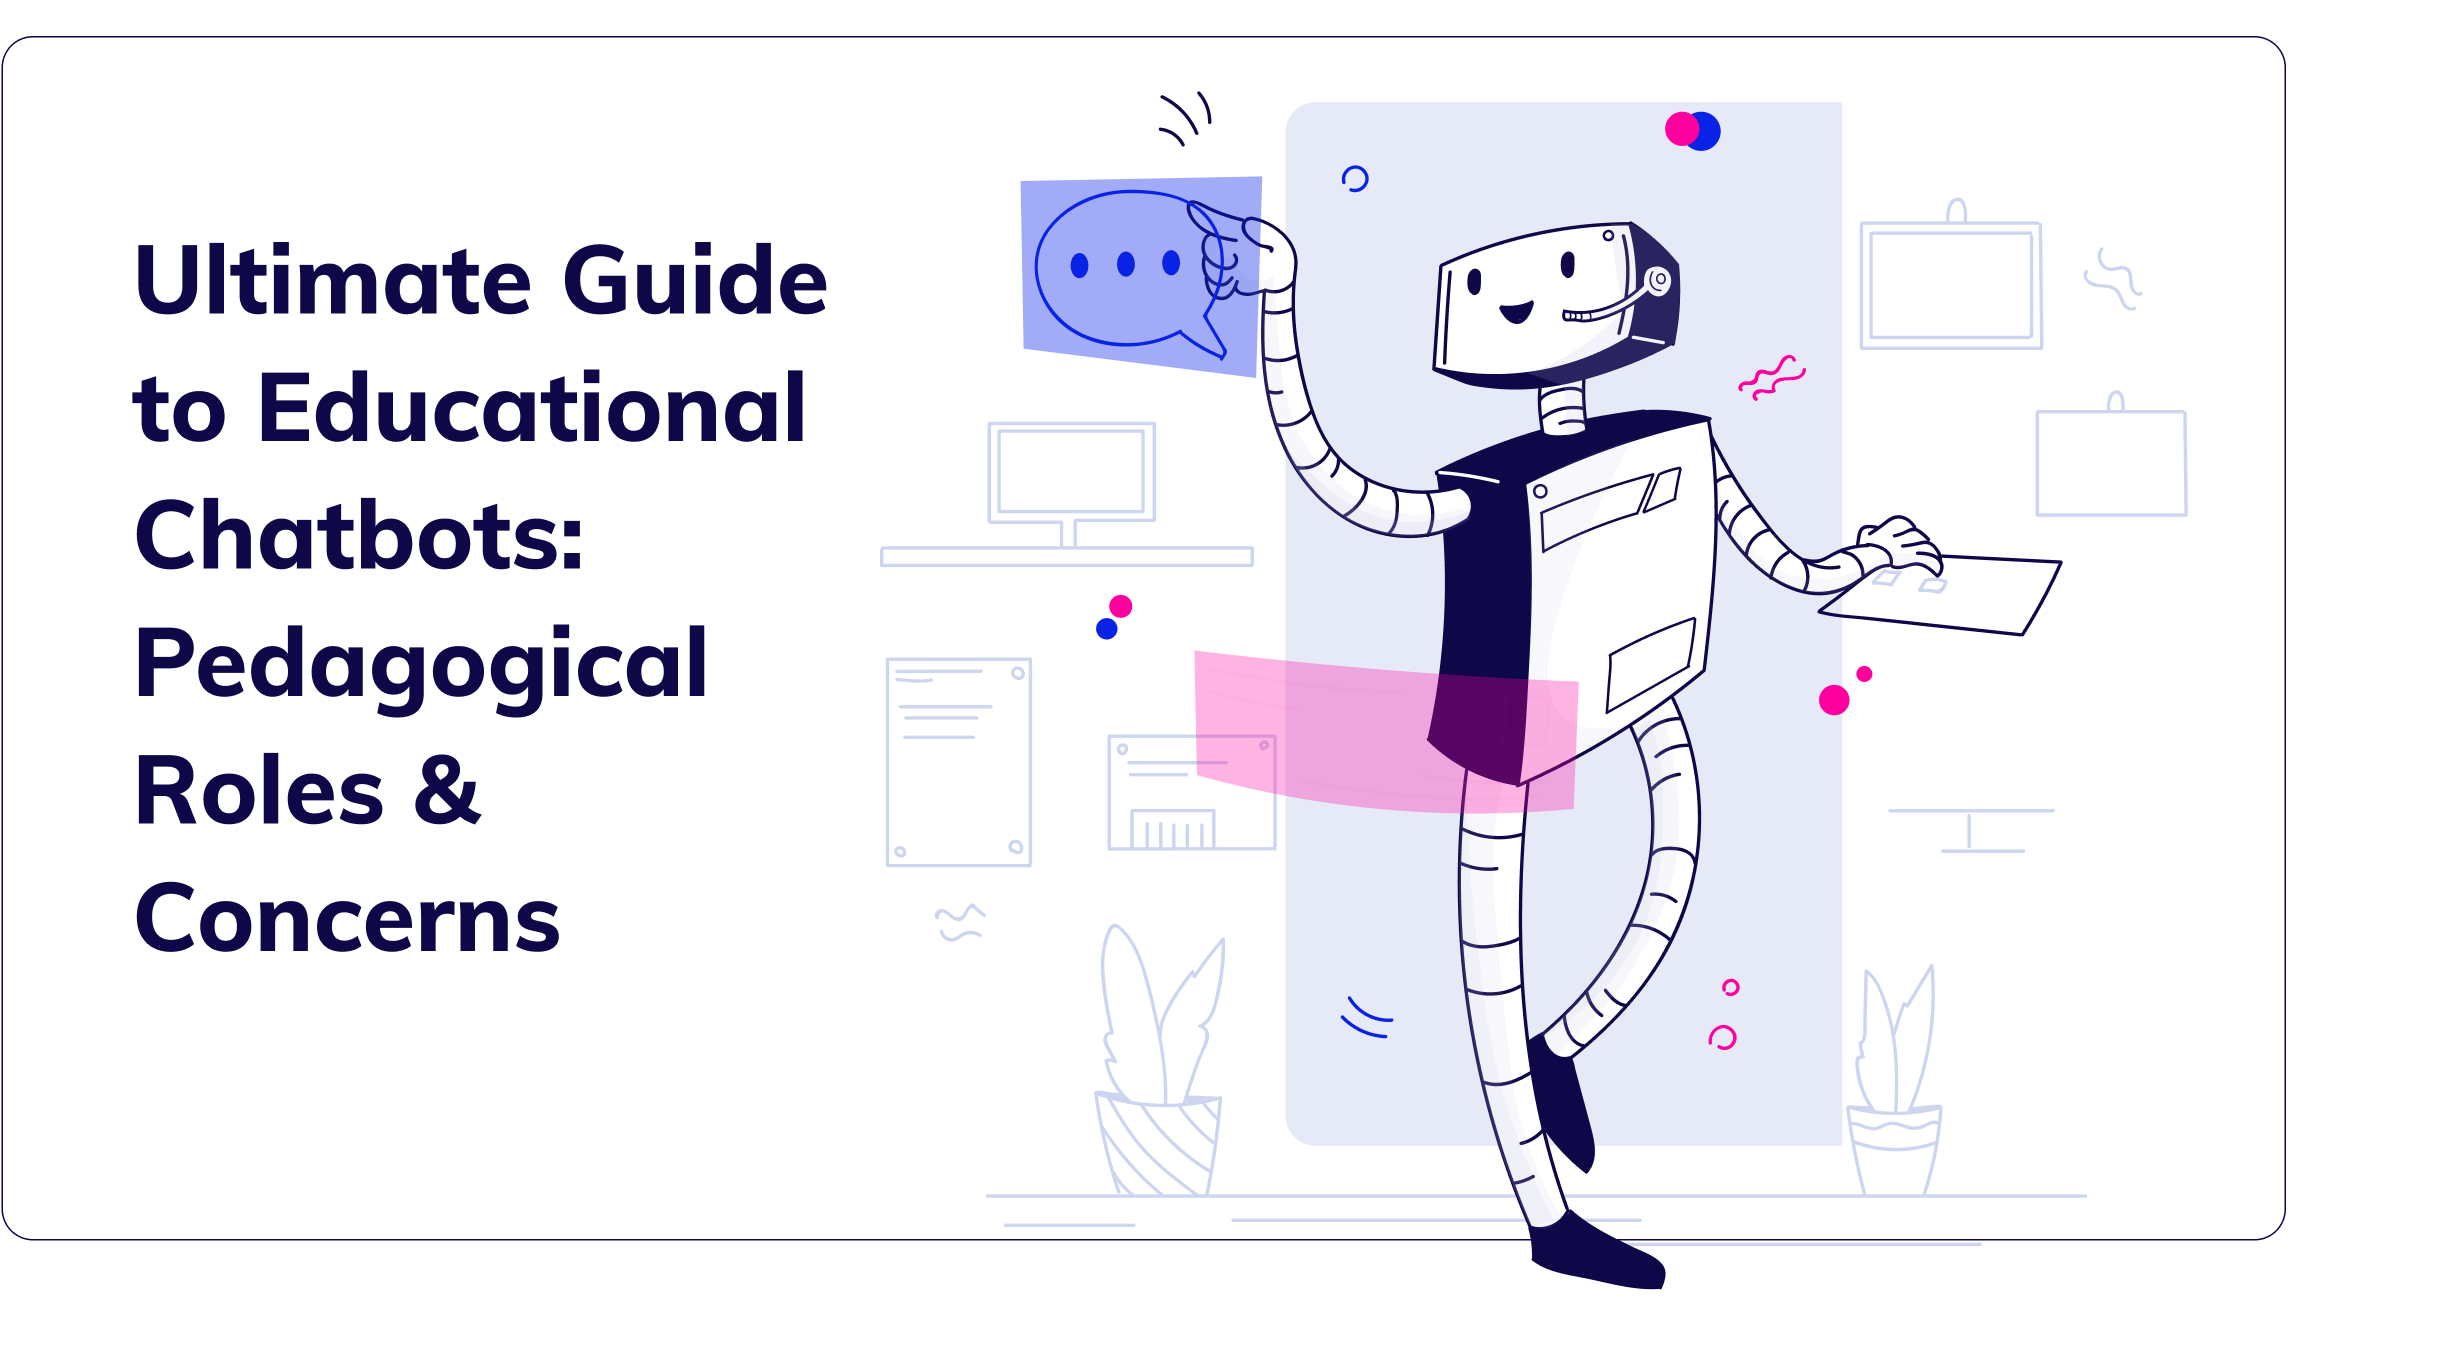 ultimate-guide-to-educational-chatbots-pedagogical-roles-concerns